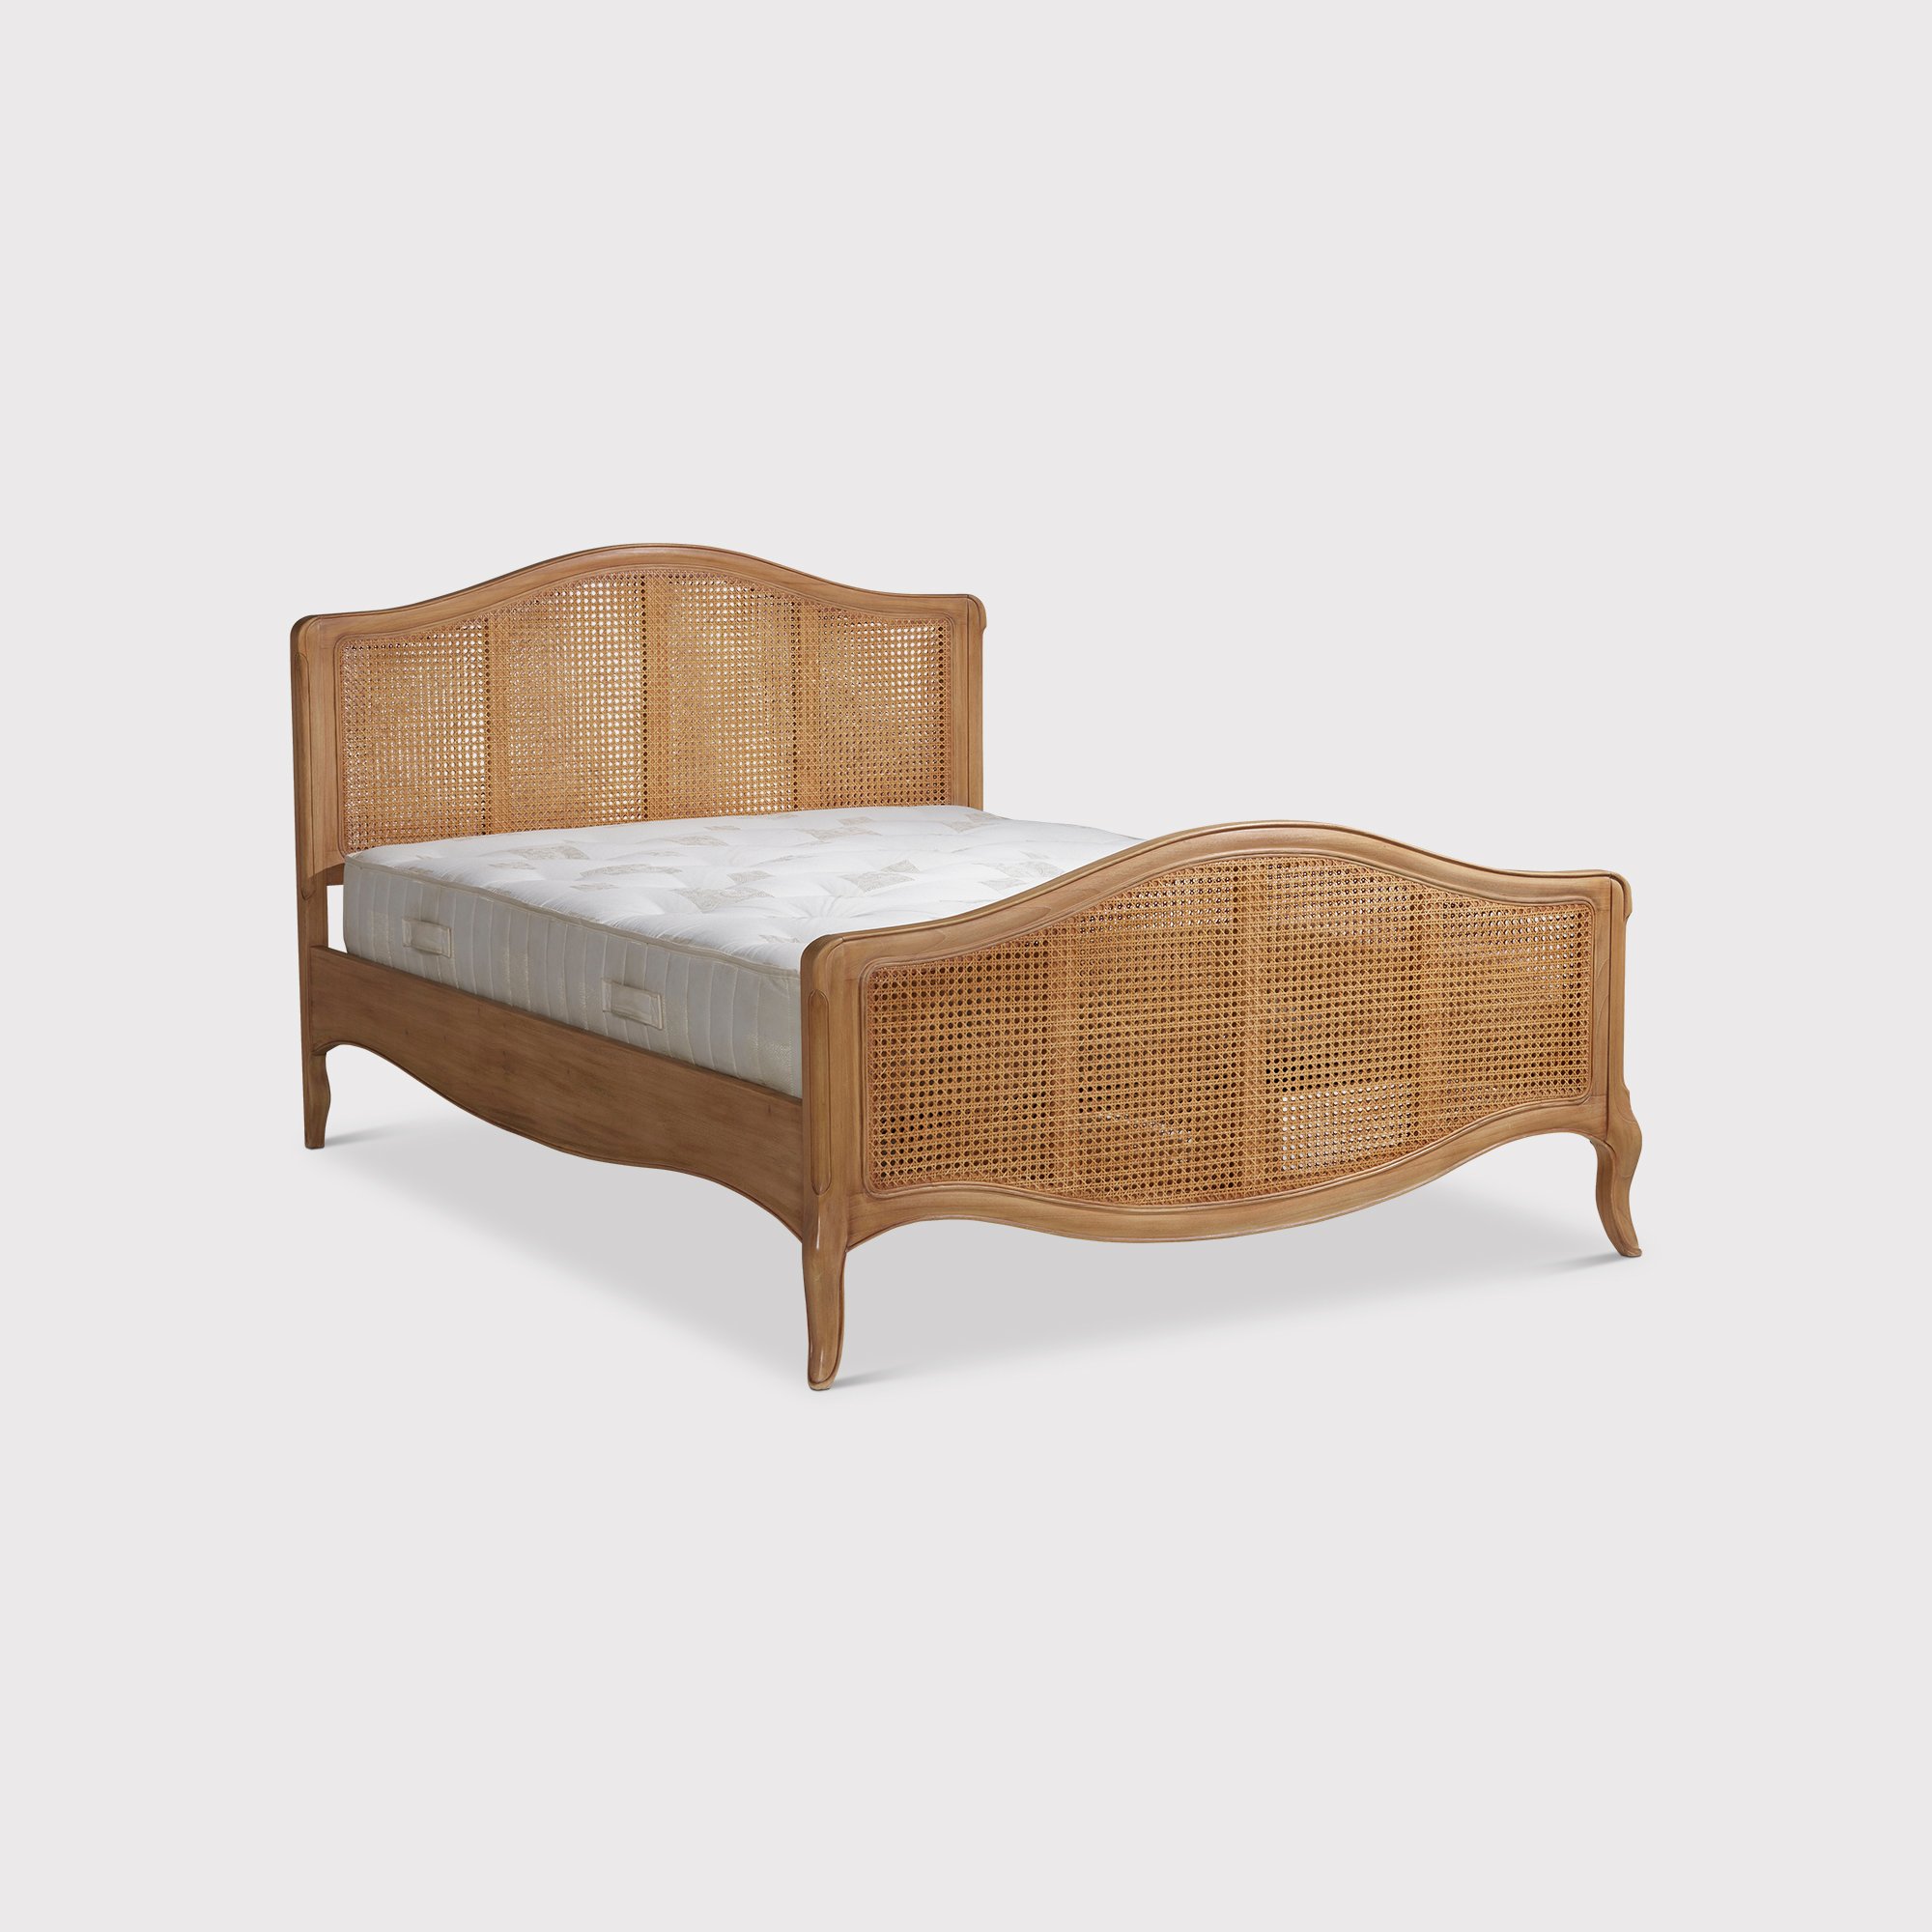 Cecile 180cm High Footend Bed, Neutral Wood | Super King | Barker & Stonehouse